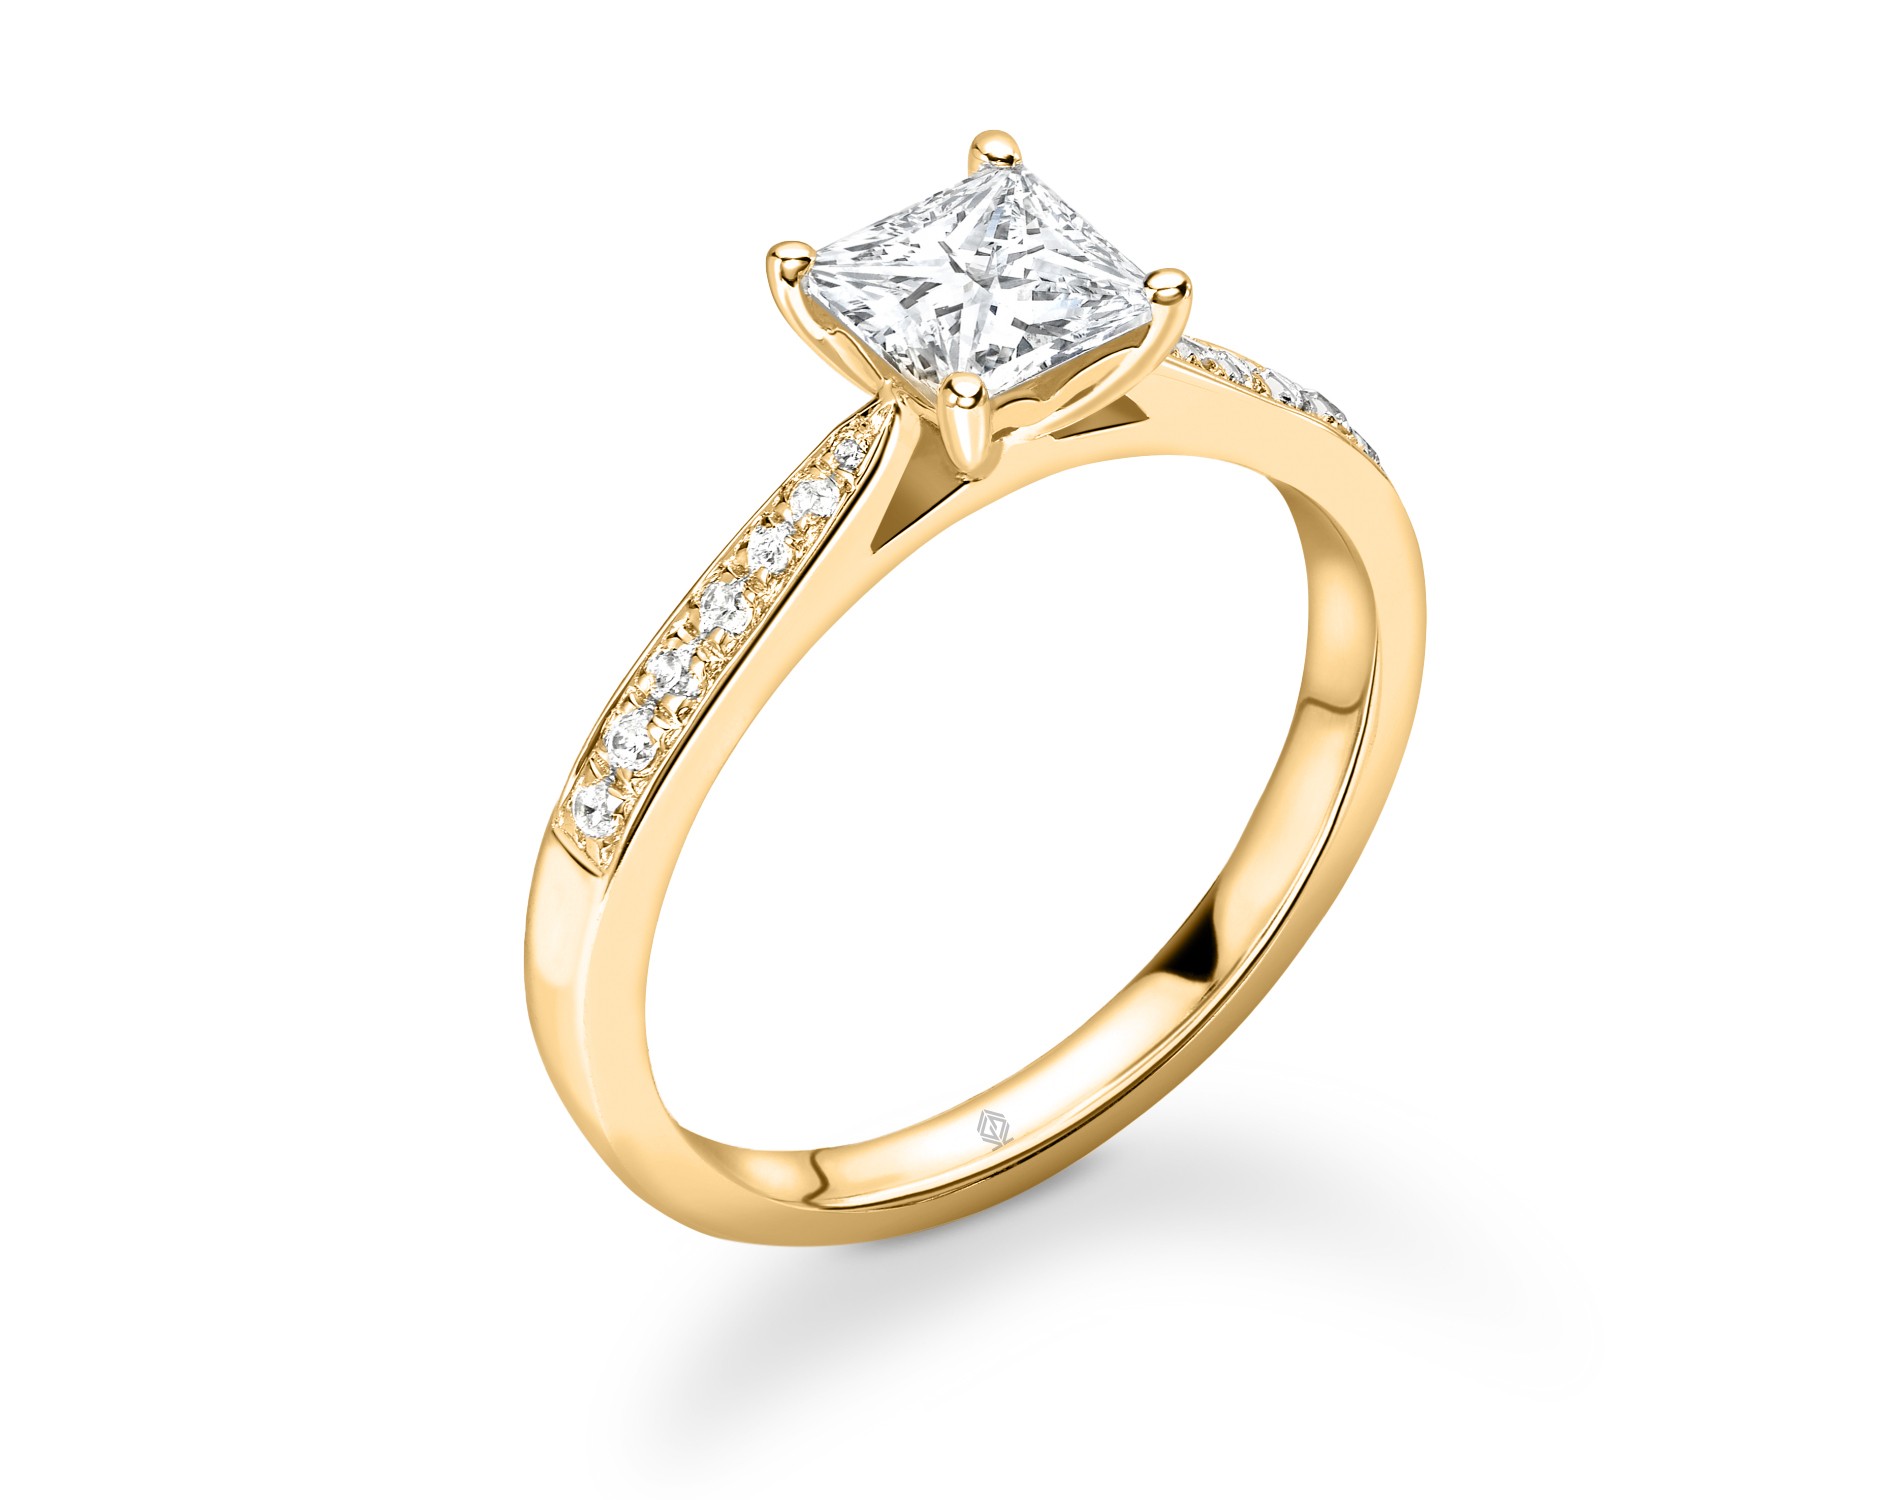 18K YELLOW GOLD PRINCESS CUT DIAMOND ENGAGEMENT RING WITH SIDE STONES CHANNEL SET